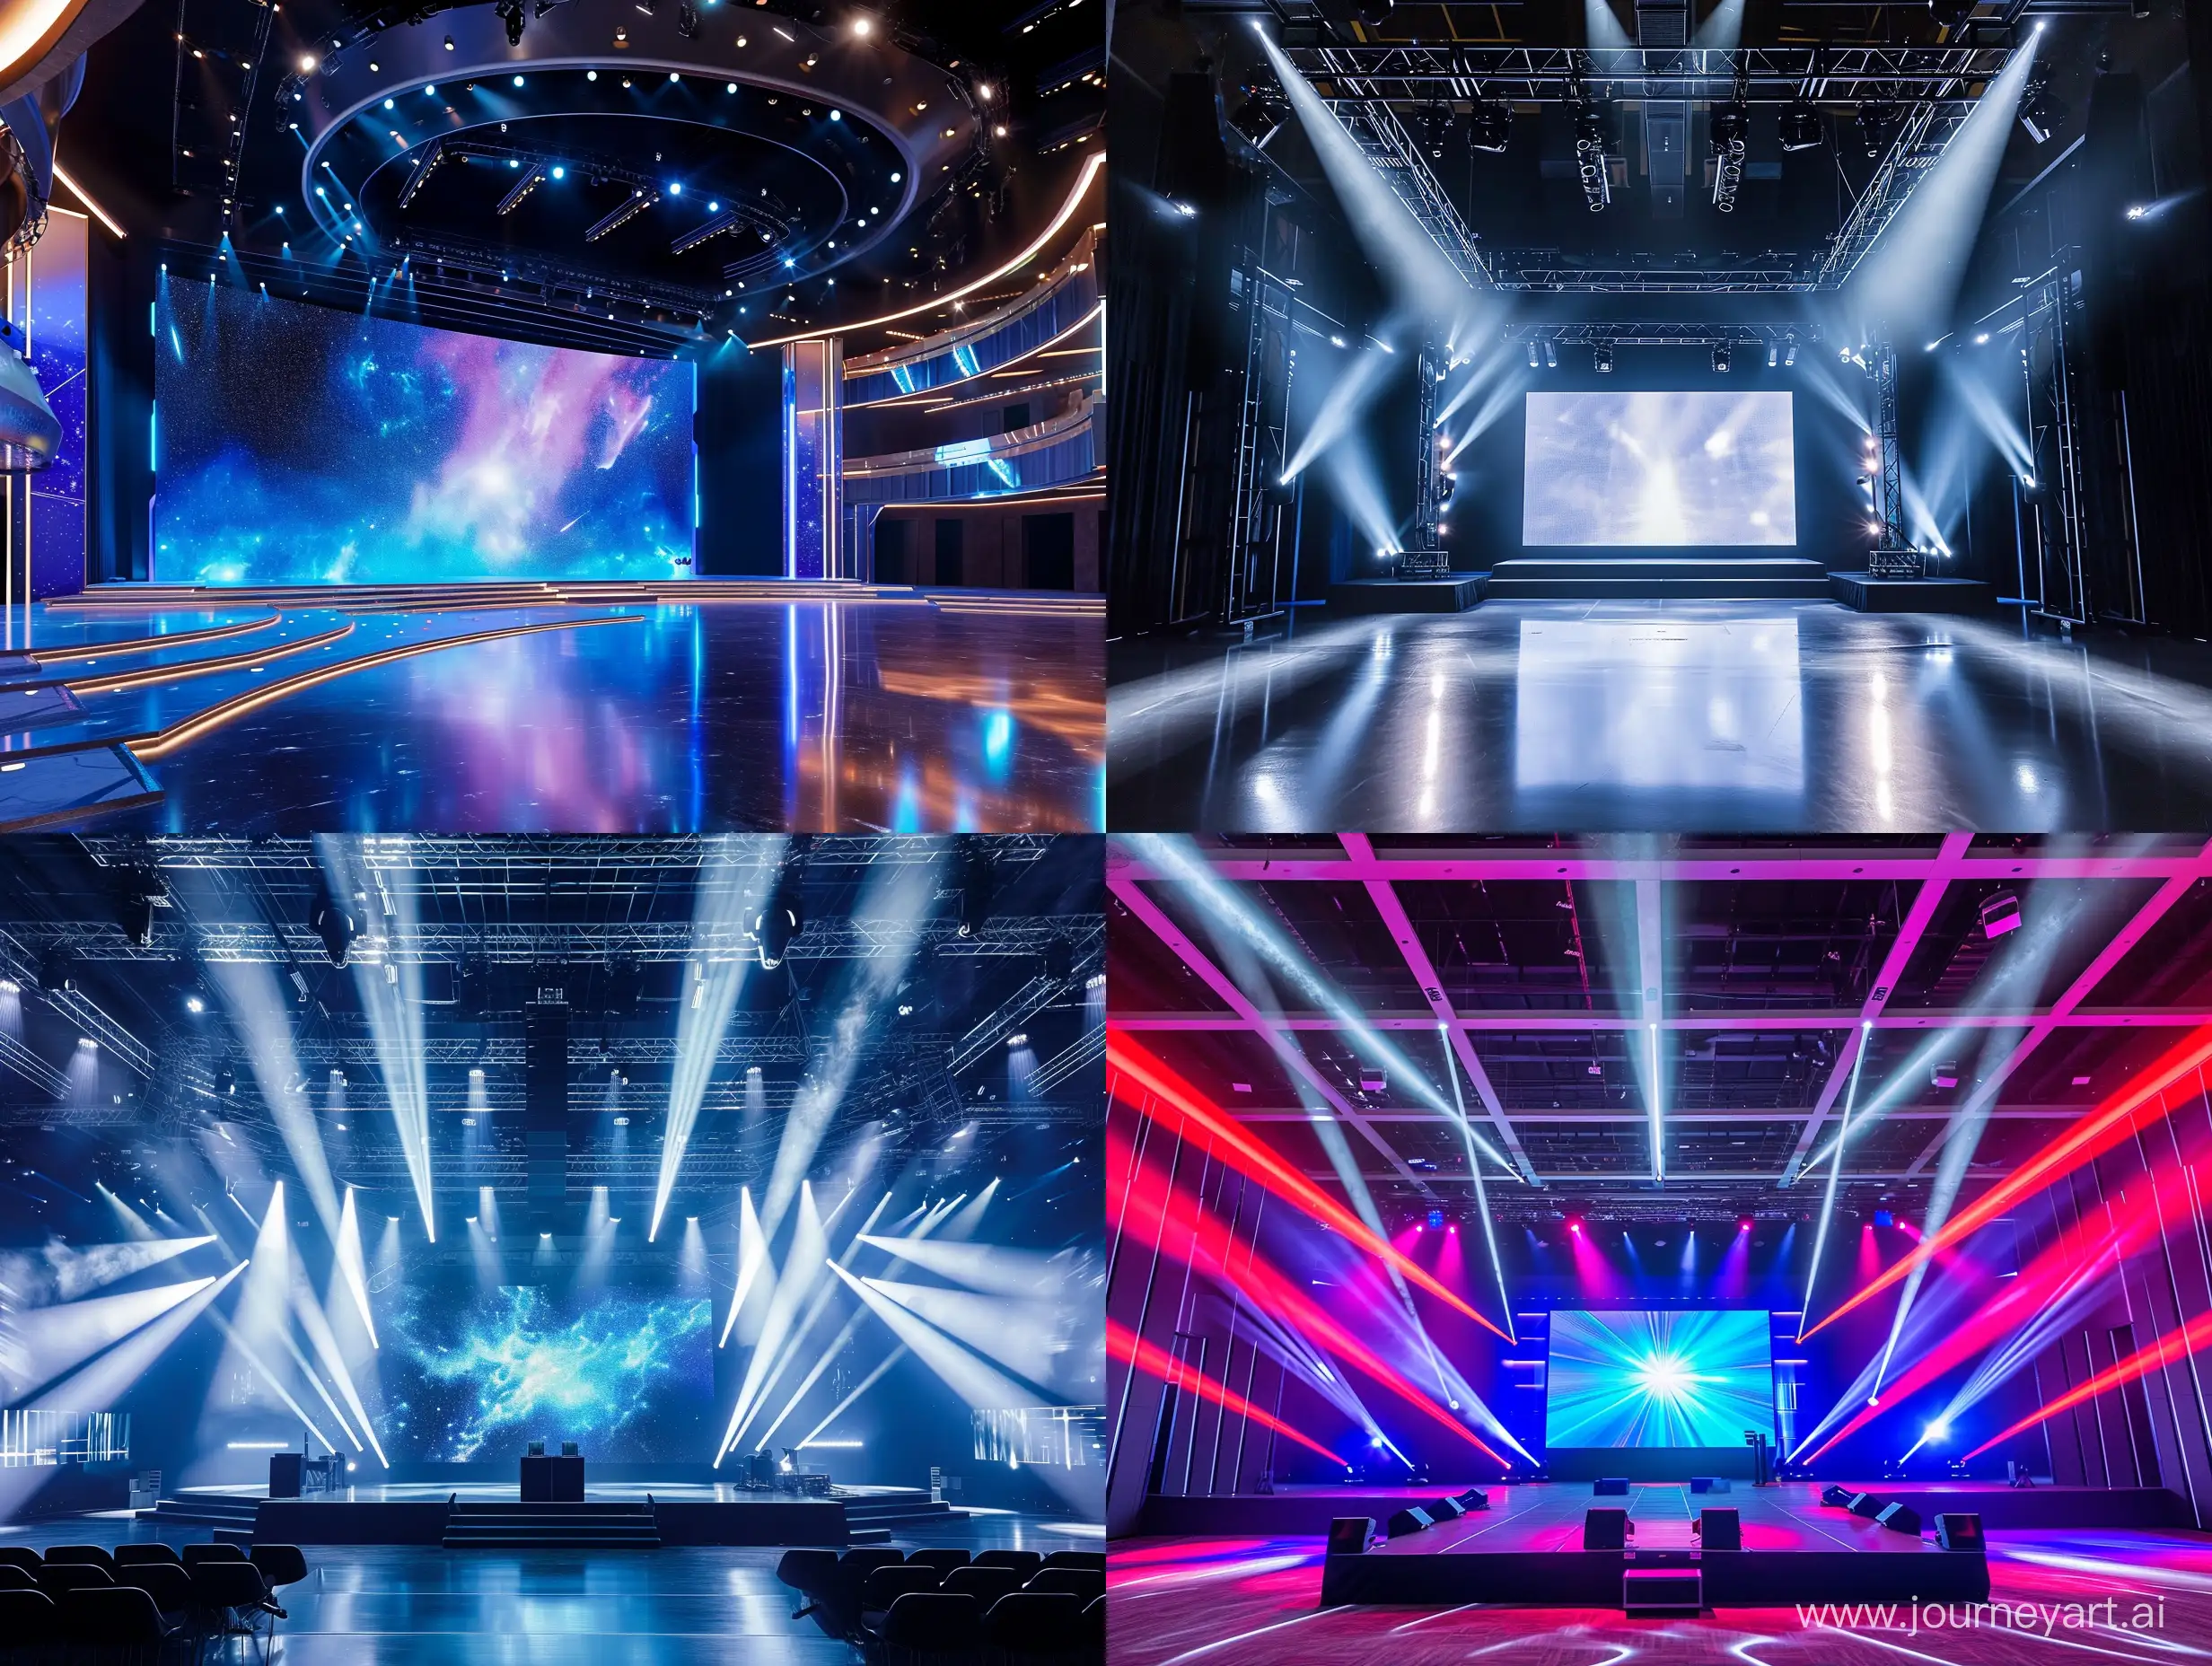 StateoftheArt-Product-Launch-Event-Hall-with-Stunning-Stage-Effects-and-Massive-Center-Screen